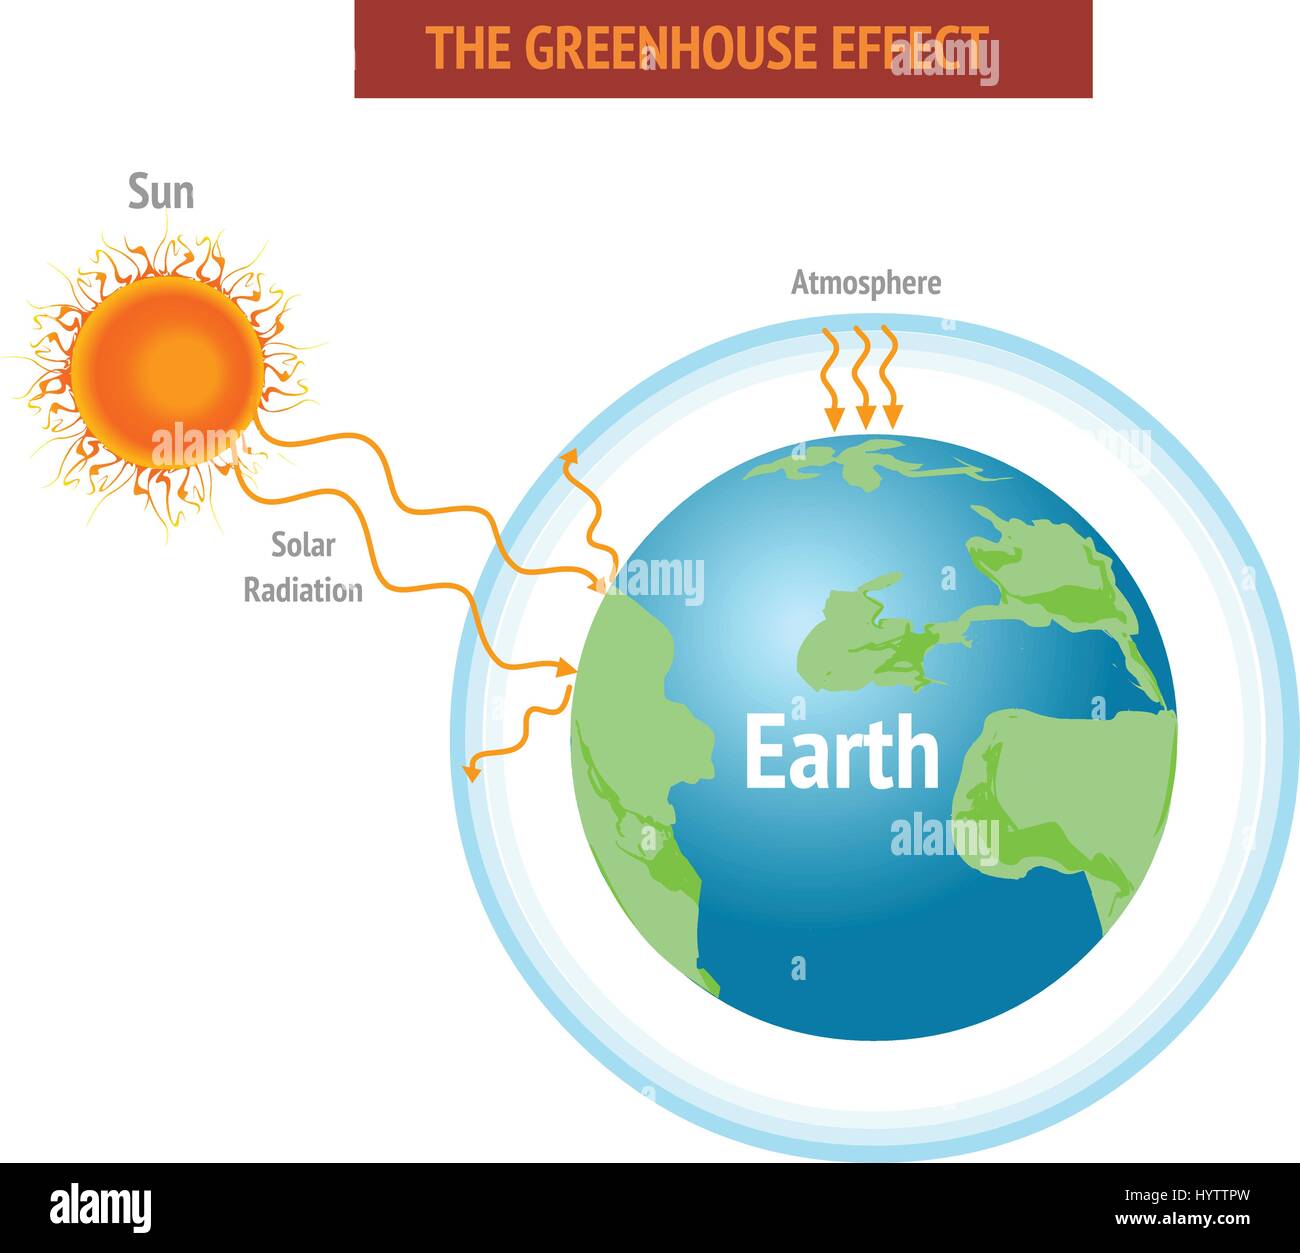 Greenhouse effect and global warming vector illustration Stock Vector